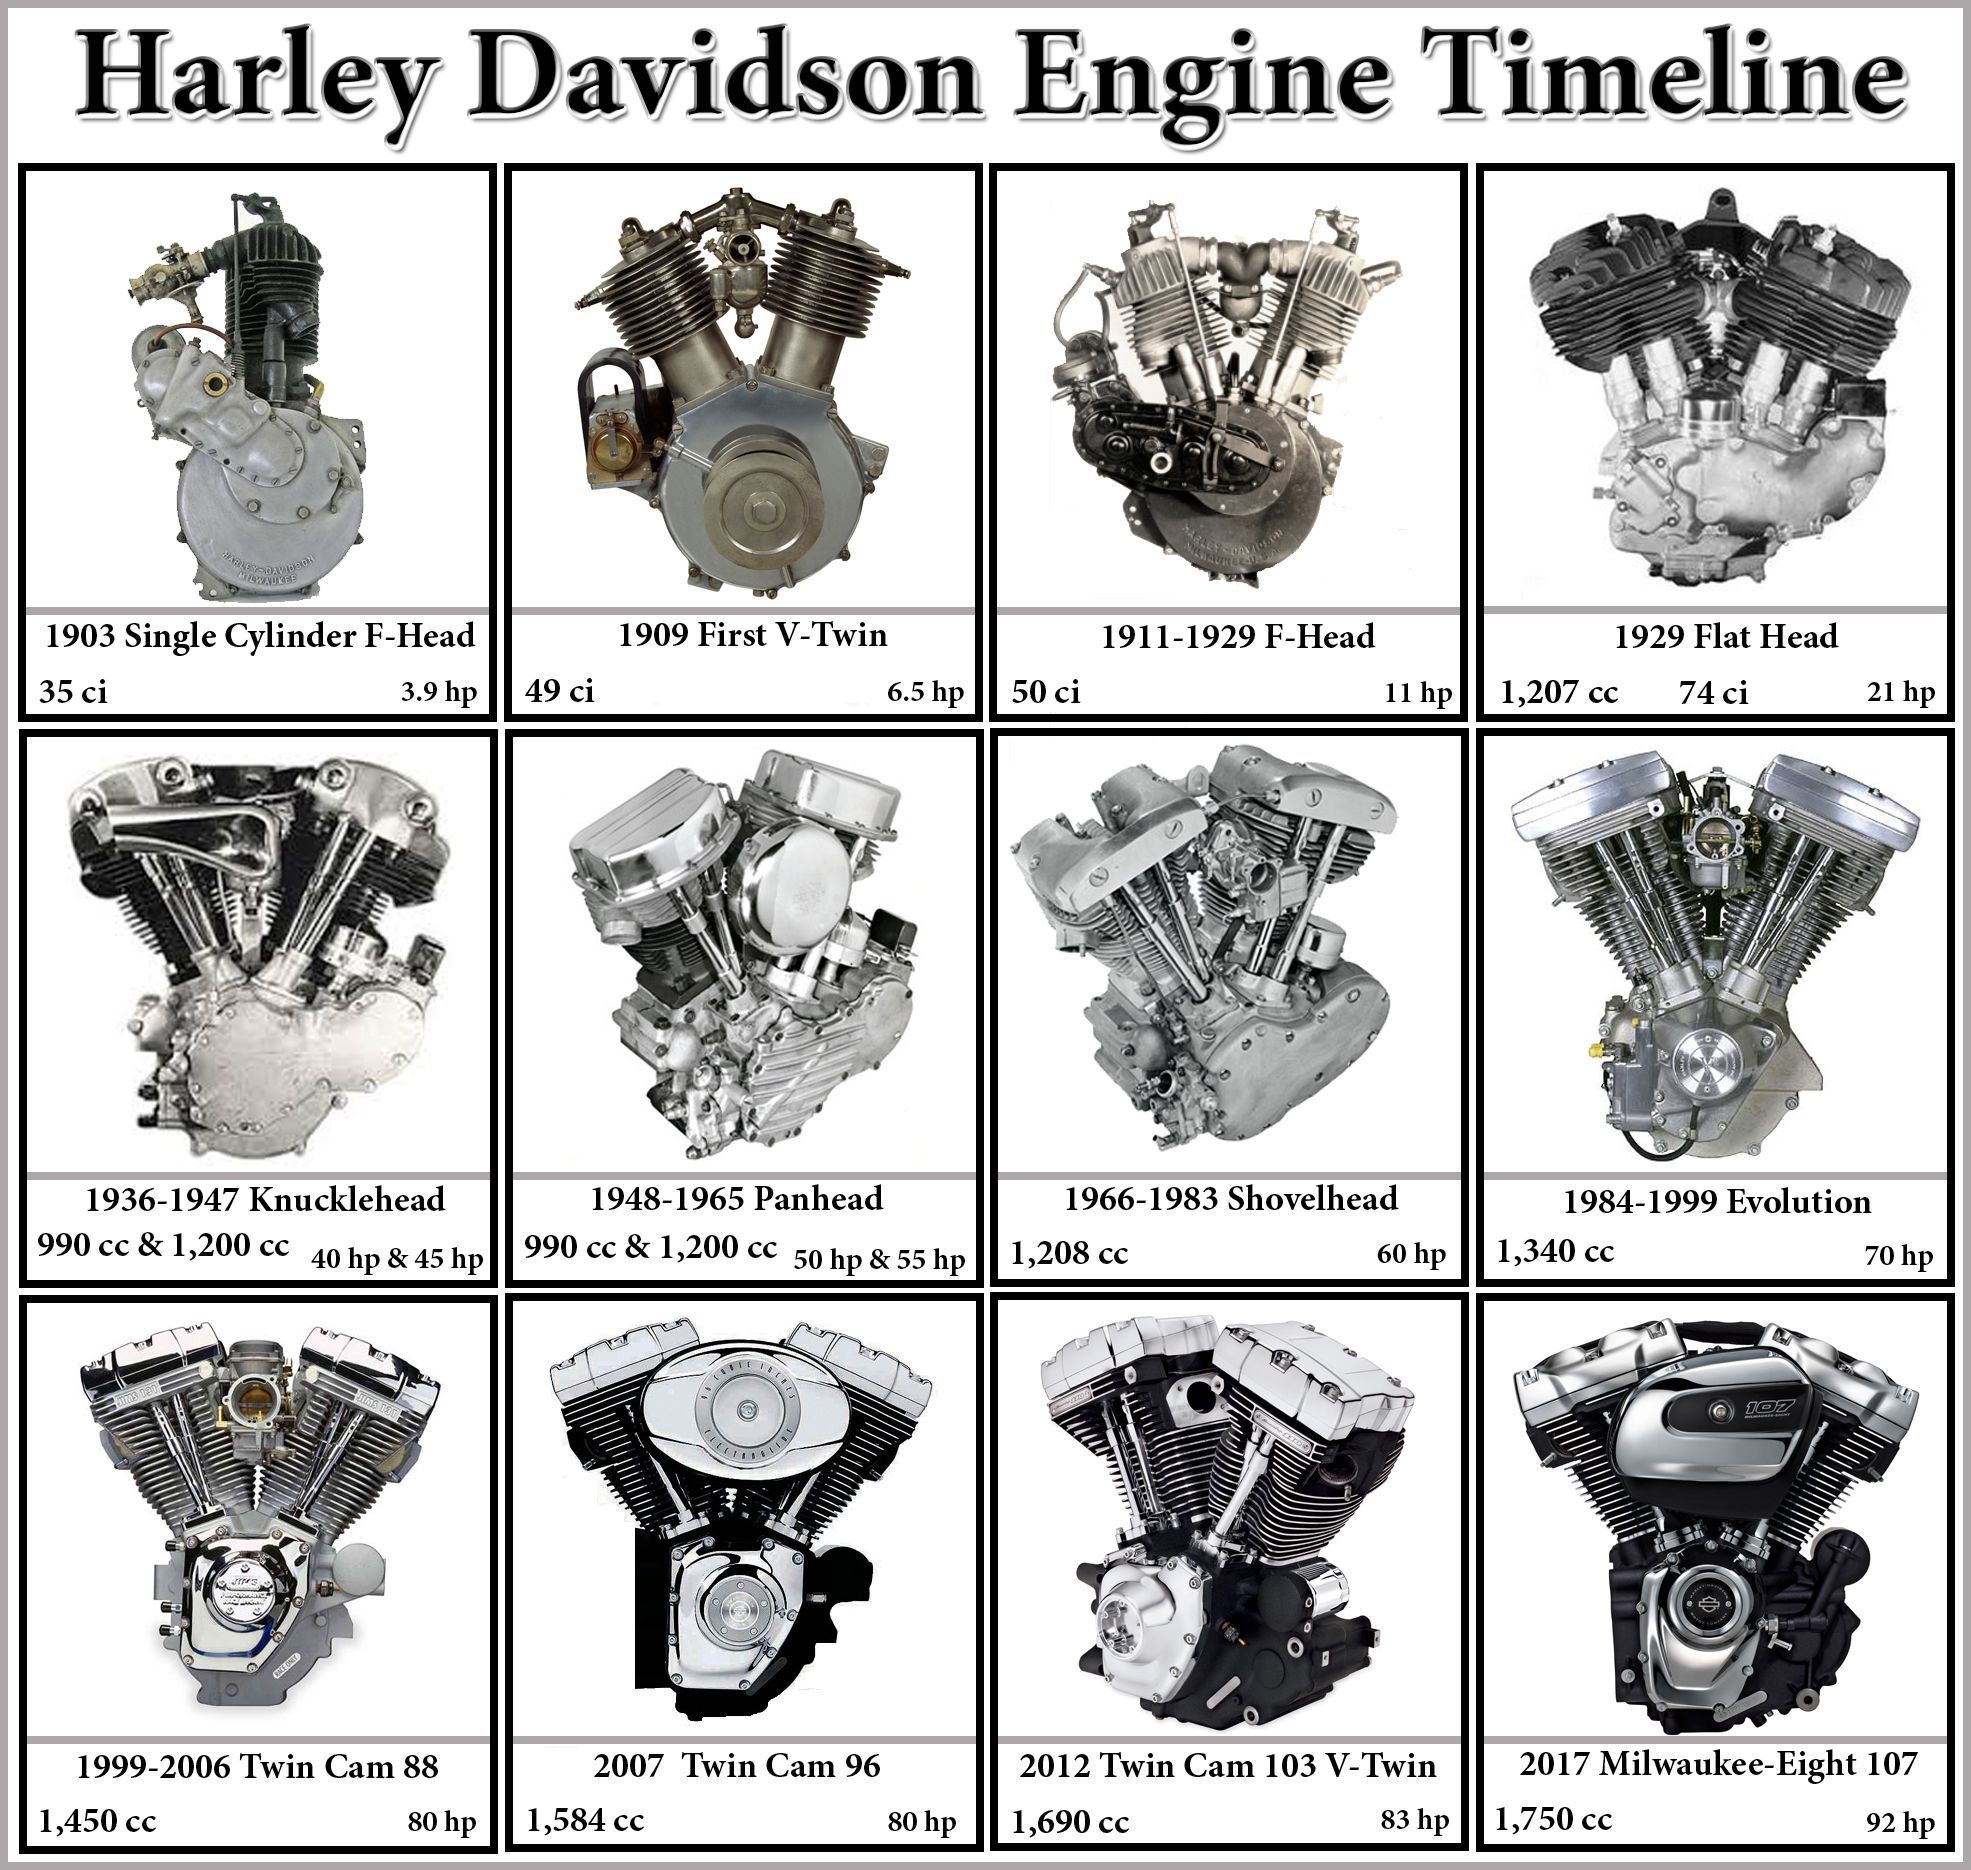 Infographic showing how harley davidson motors have developed and changed over time